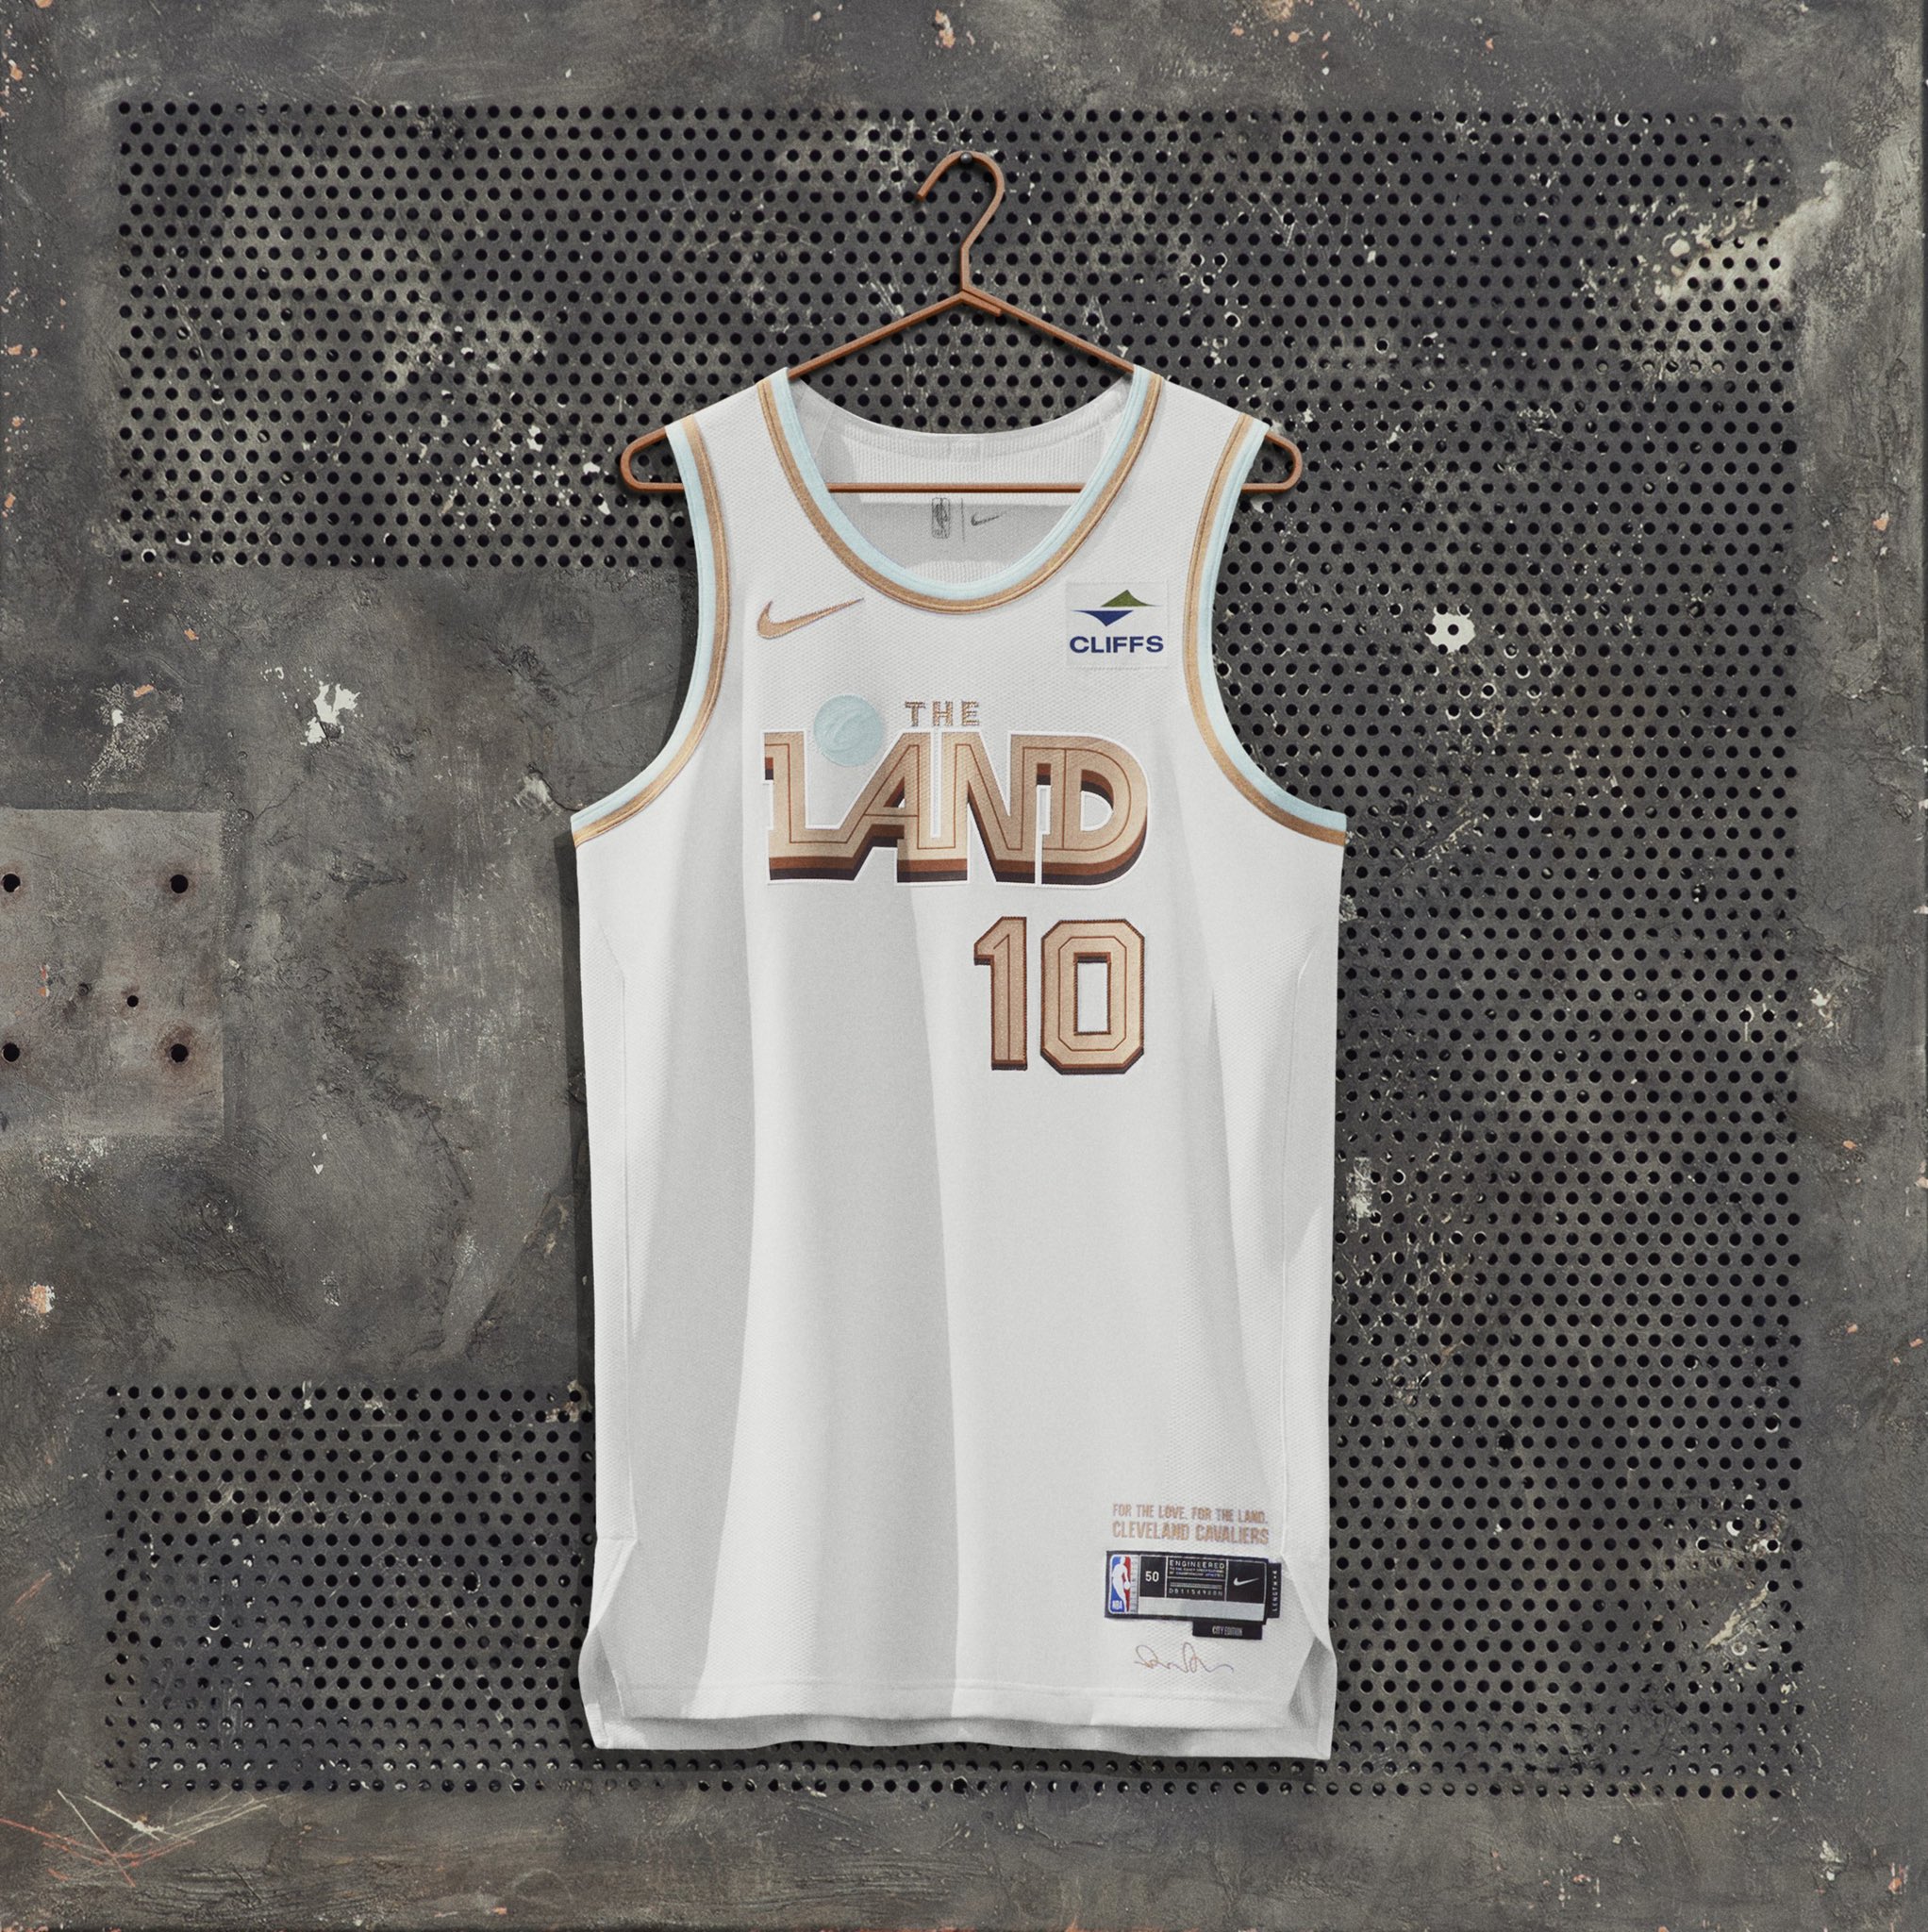 Nick DePaula on X: The Cleveland Cavaliers' City Edition jersey highlights  the city's nickname: “The Land”  / X